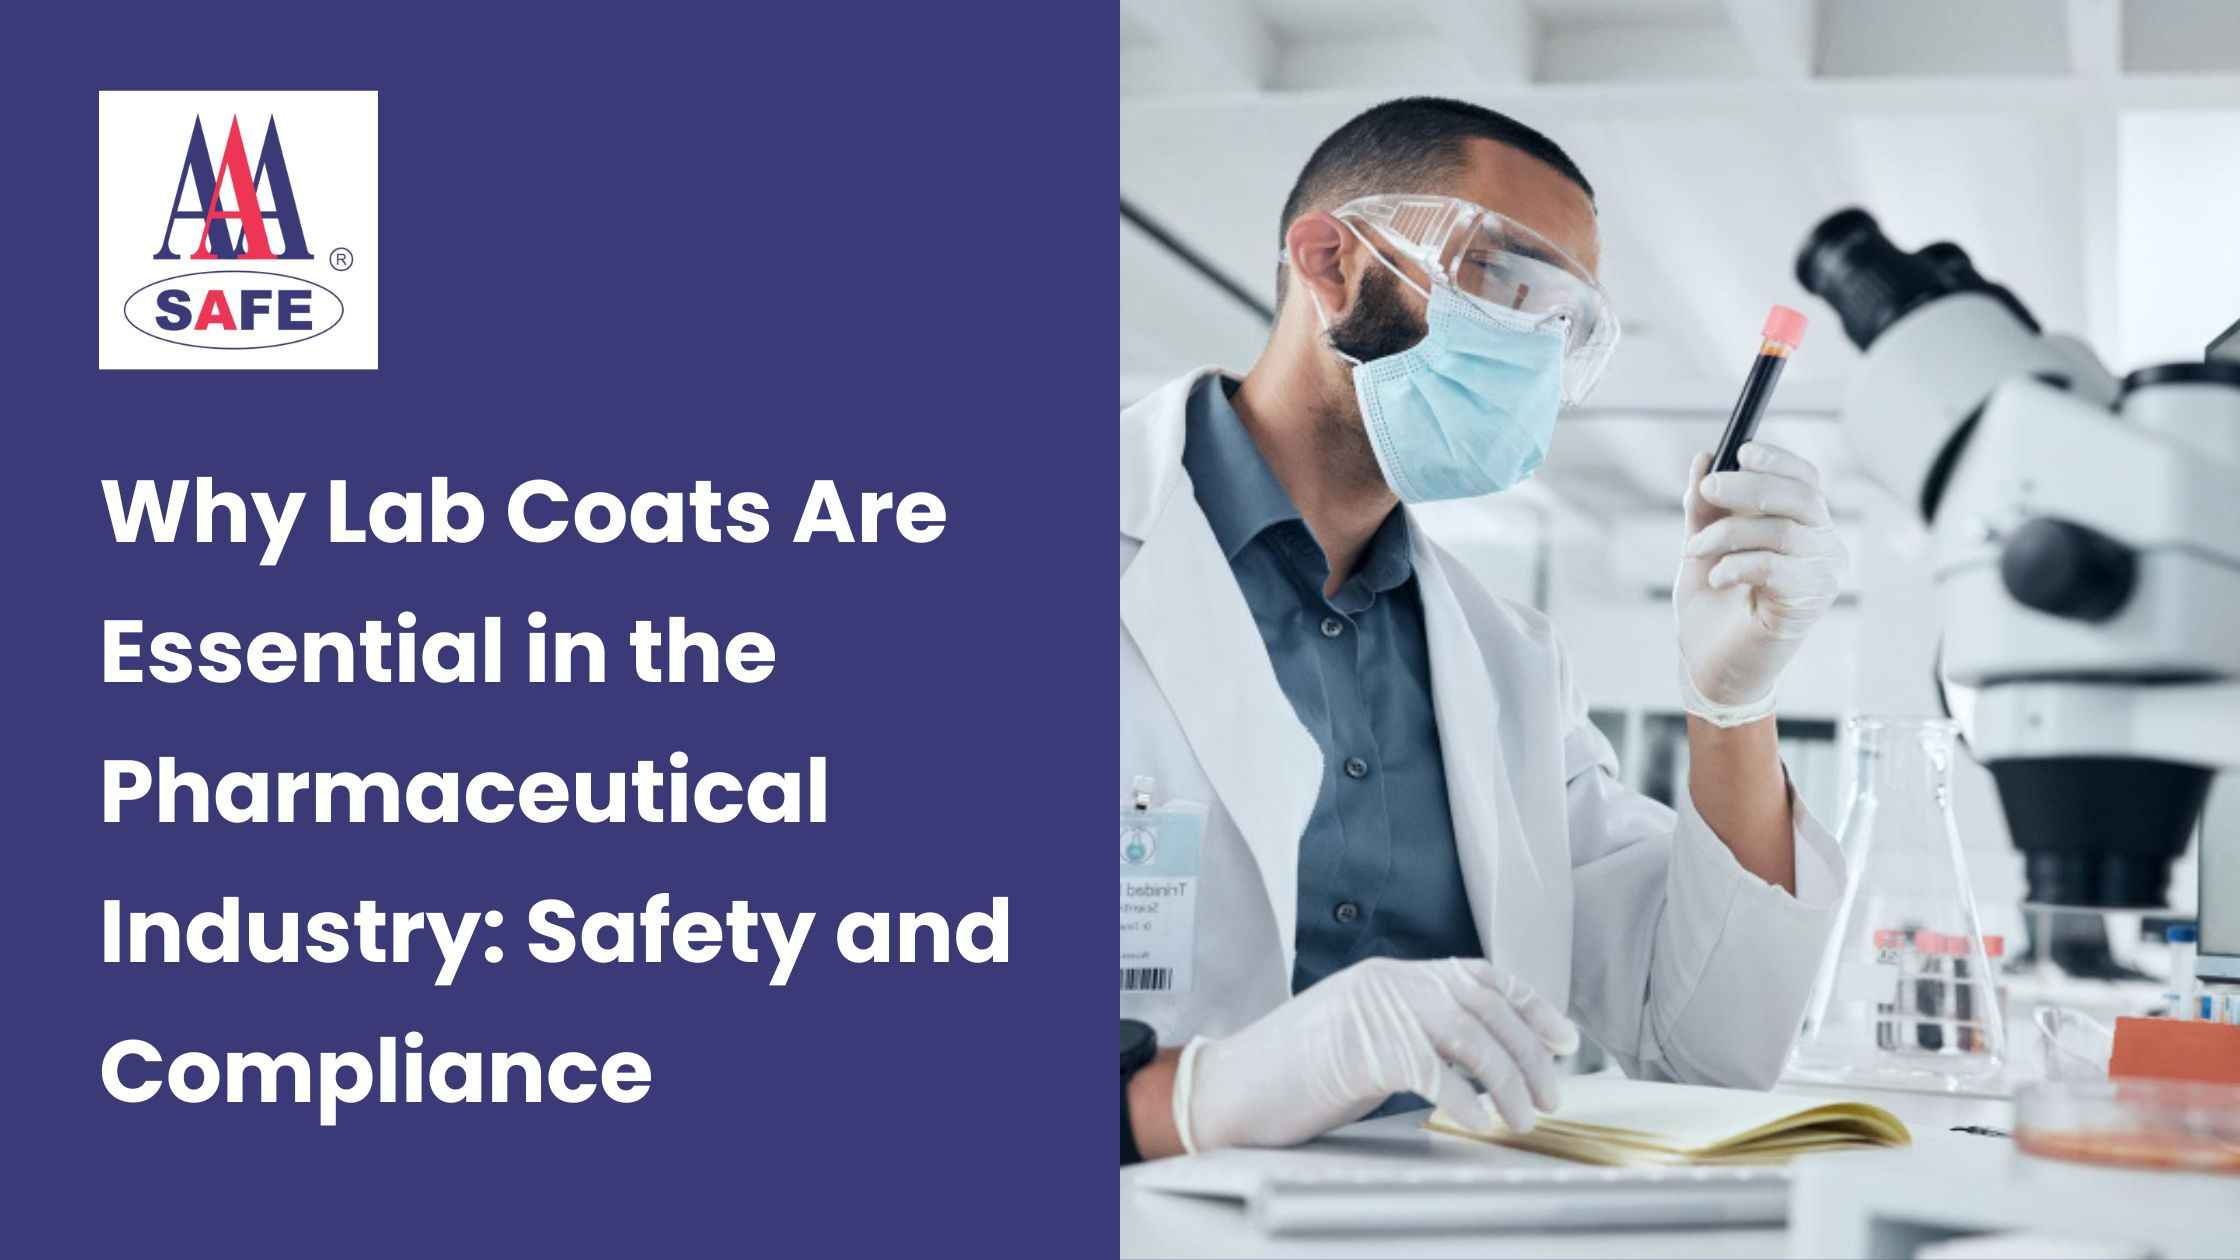 Why Lab Coats Are Essential in the Pharmaceutical Industry: Safety and Compliance